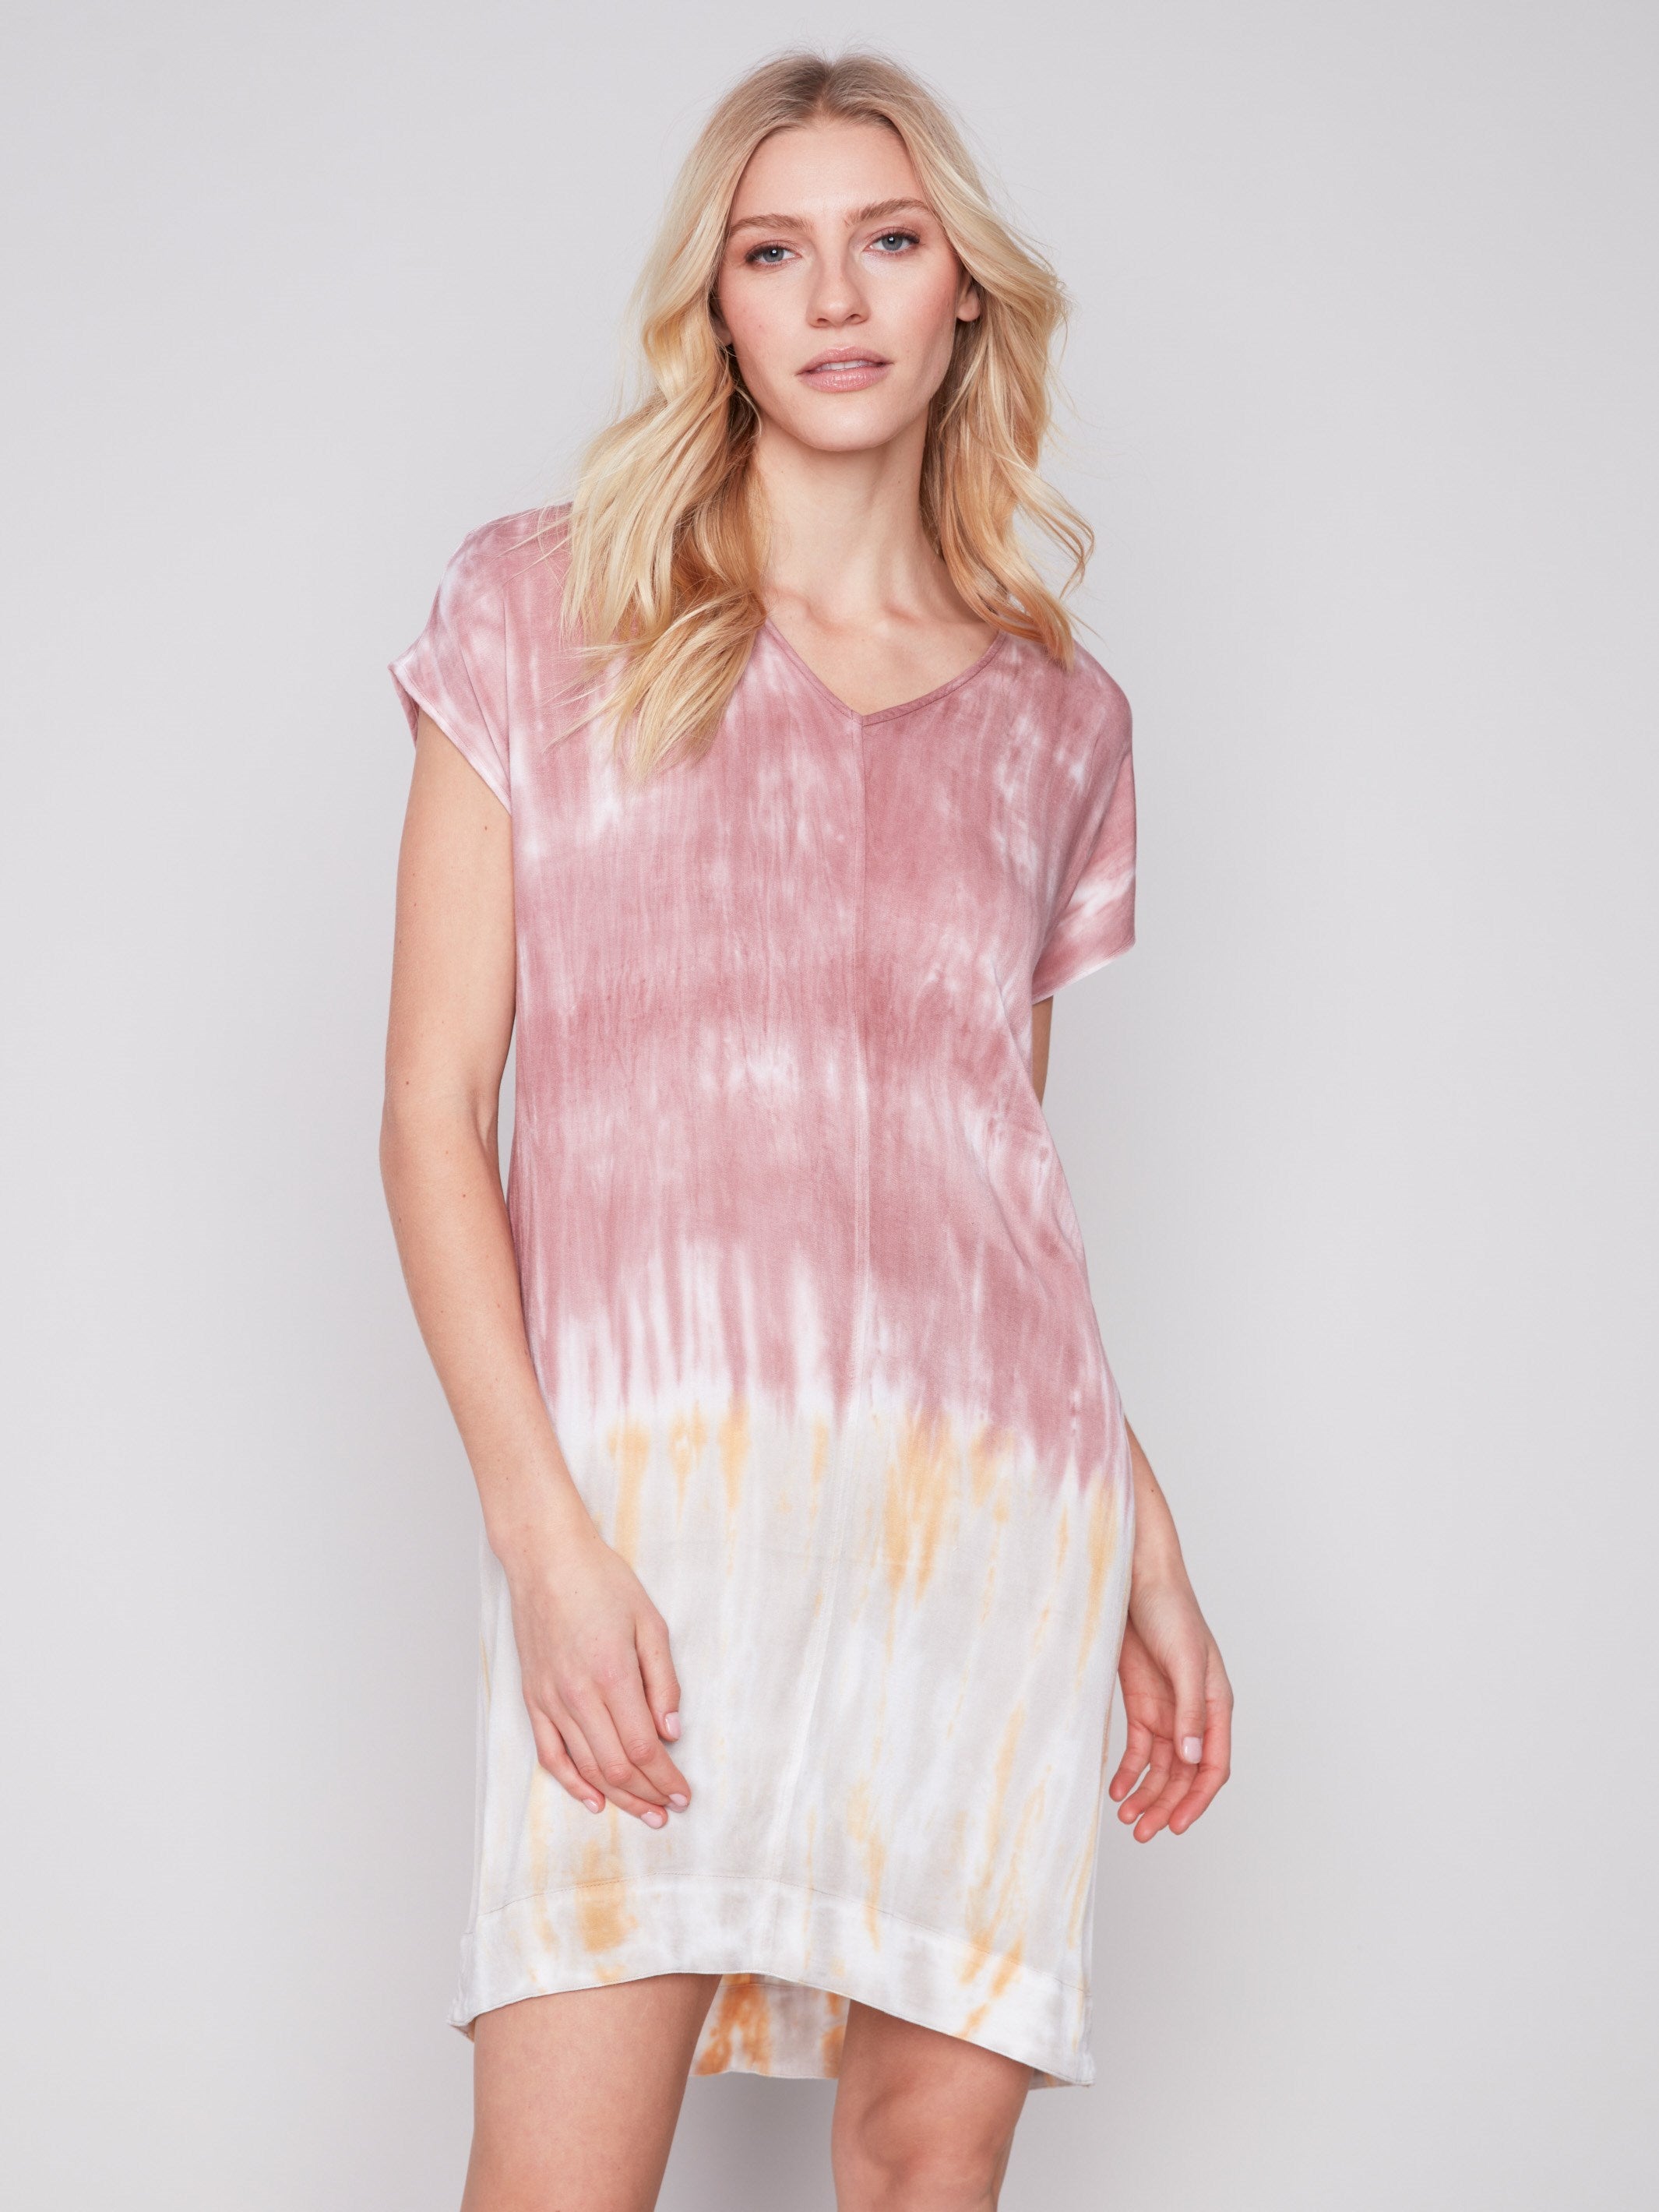 Tie-Dye Dress with Dolman Sleeves - Woodrose - Charlie B Collection Canada - Image 1